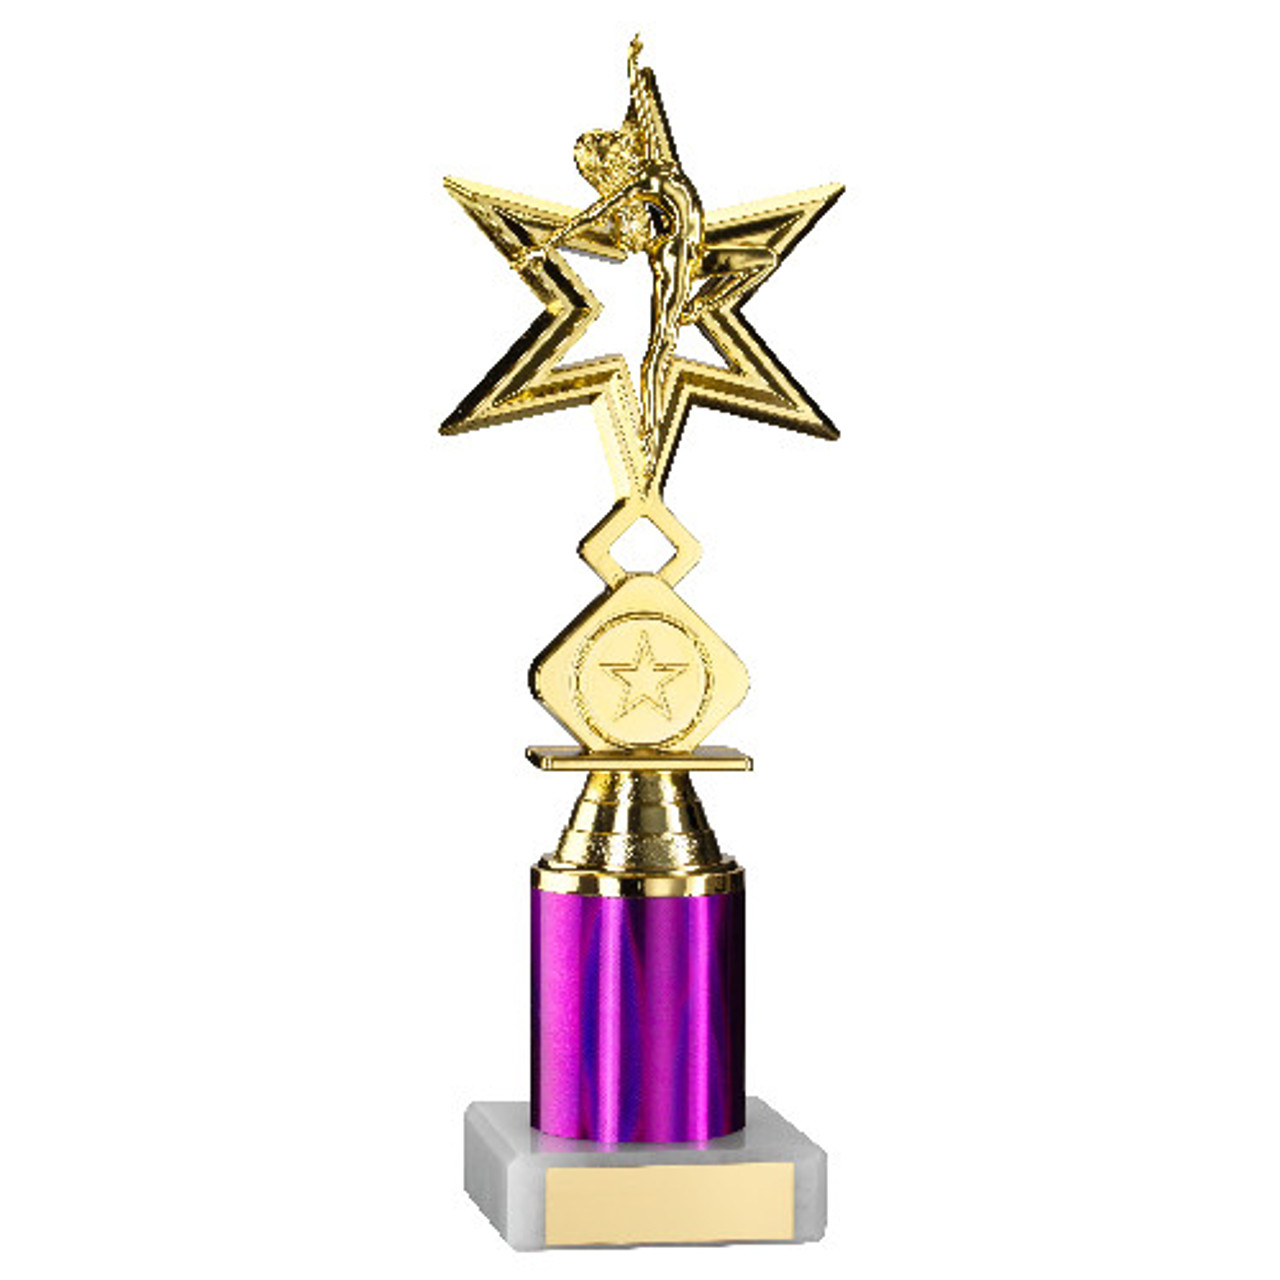 Dancer Star Gold Figure Award on Marble Base 10" with Purple Tube